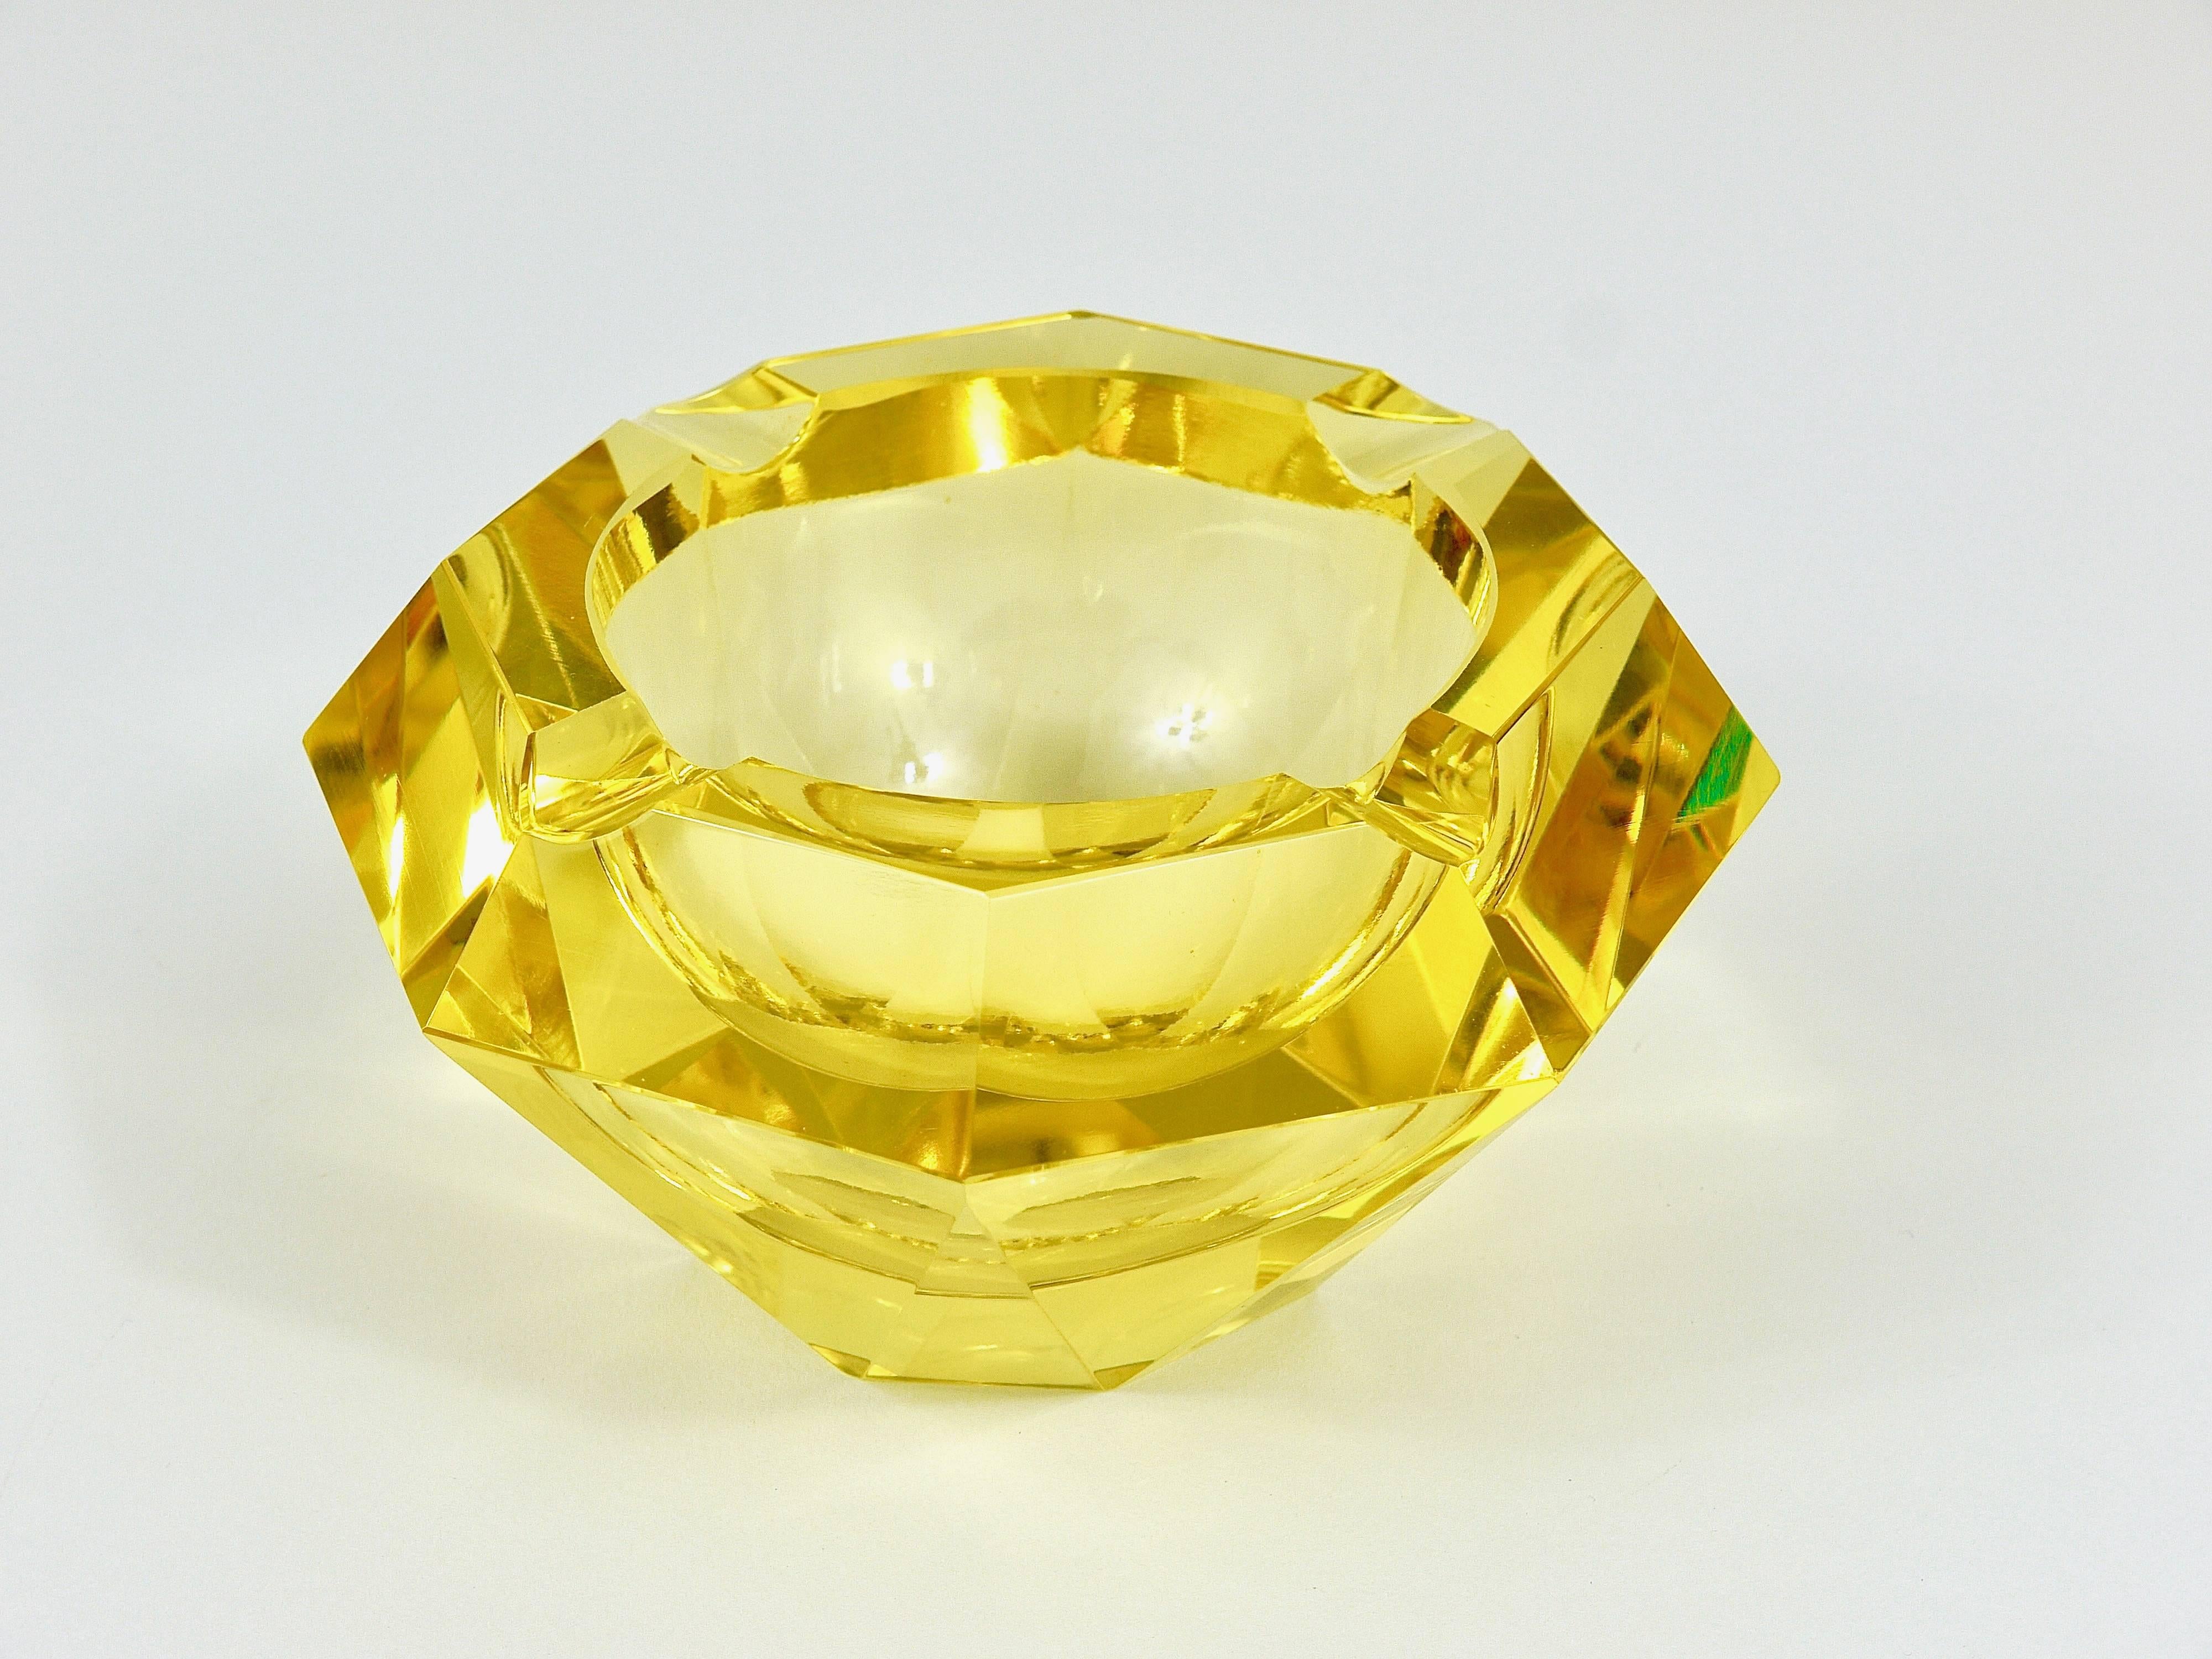 Murano Glass 1930s Lemon Faceted Diamond Ashtray in Excellent Condition, Murano, Italy